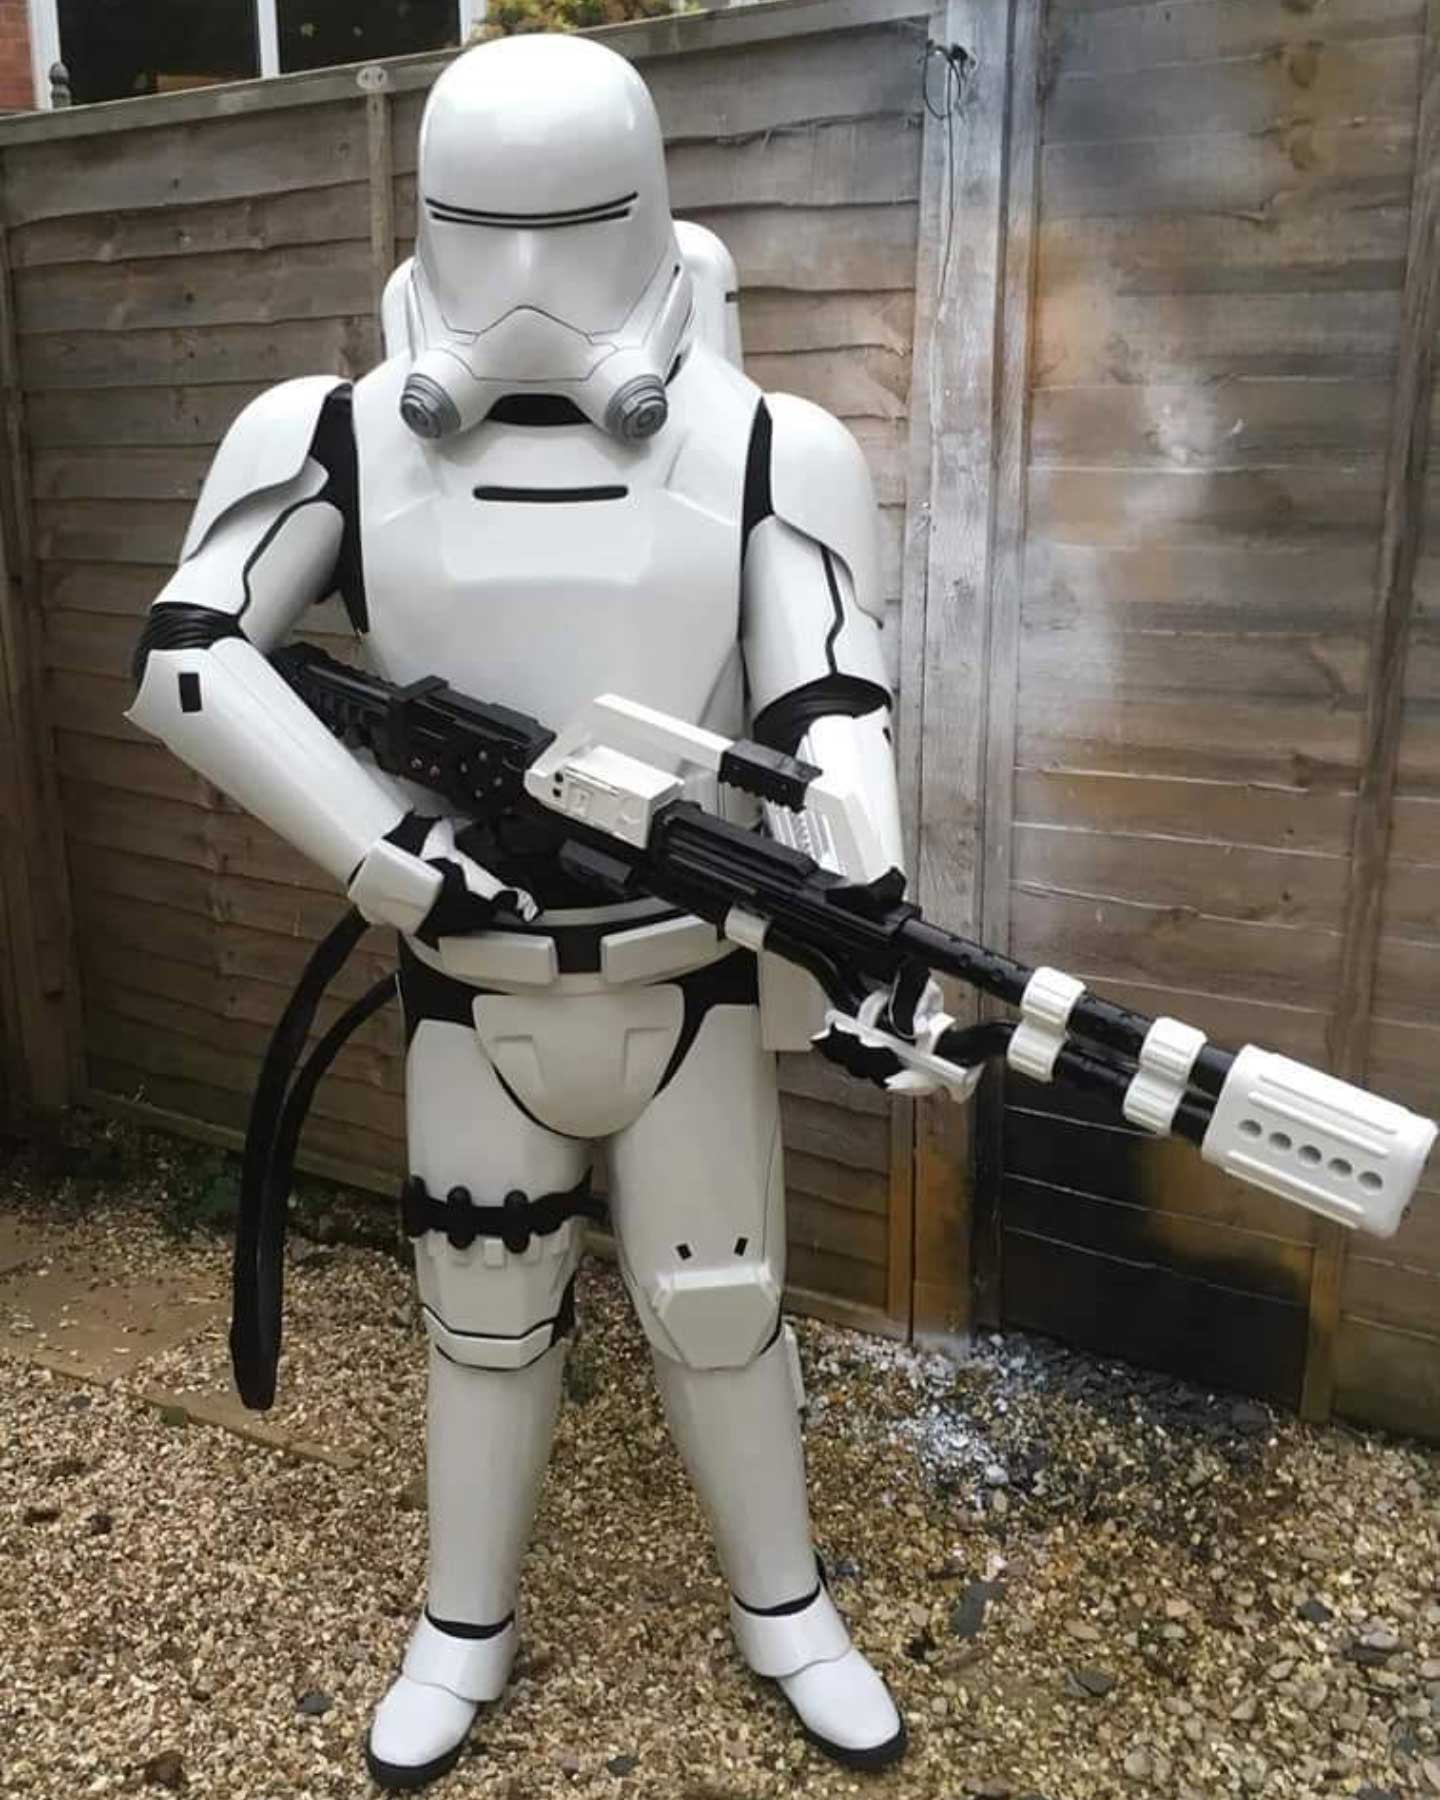 Stormtrooper Accessories Review from Darrell